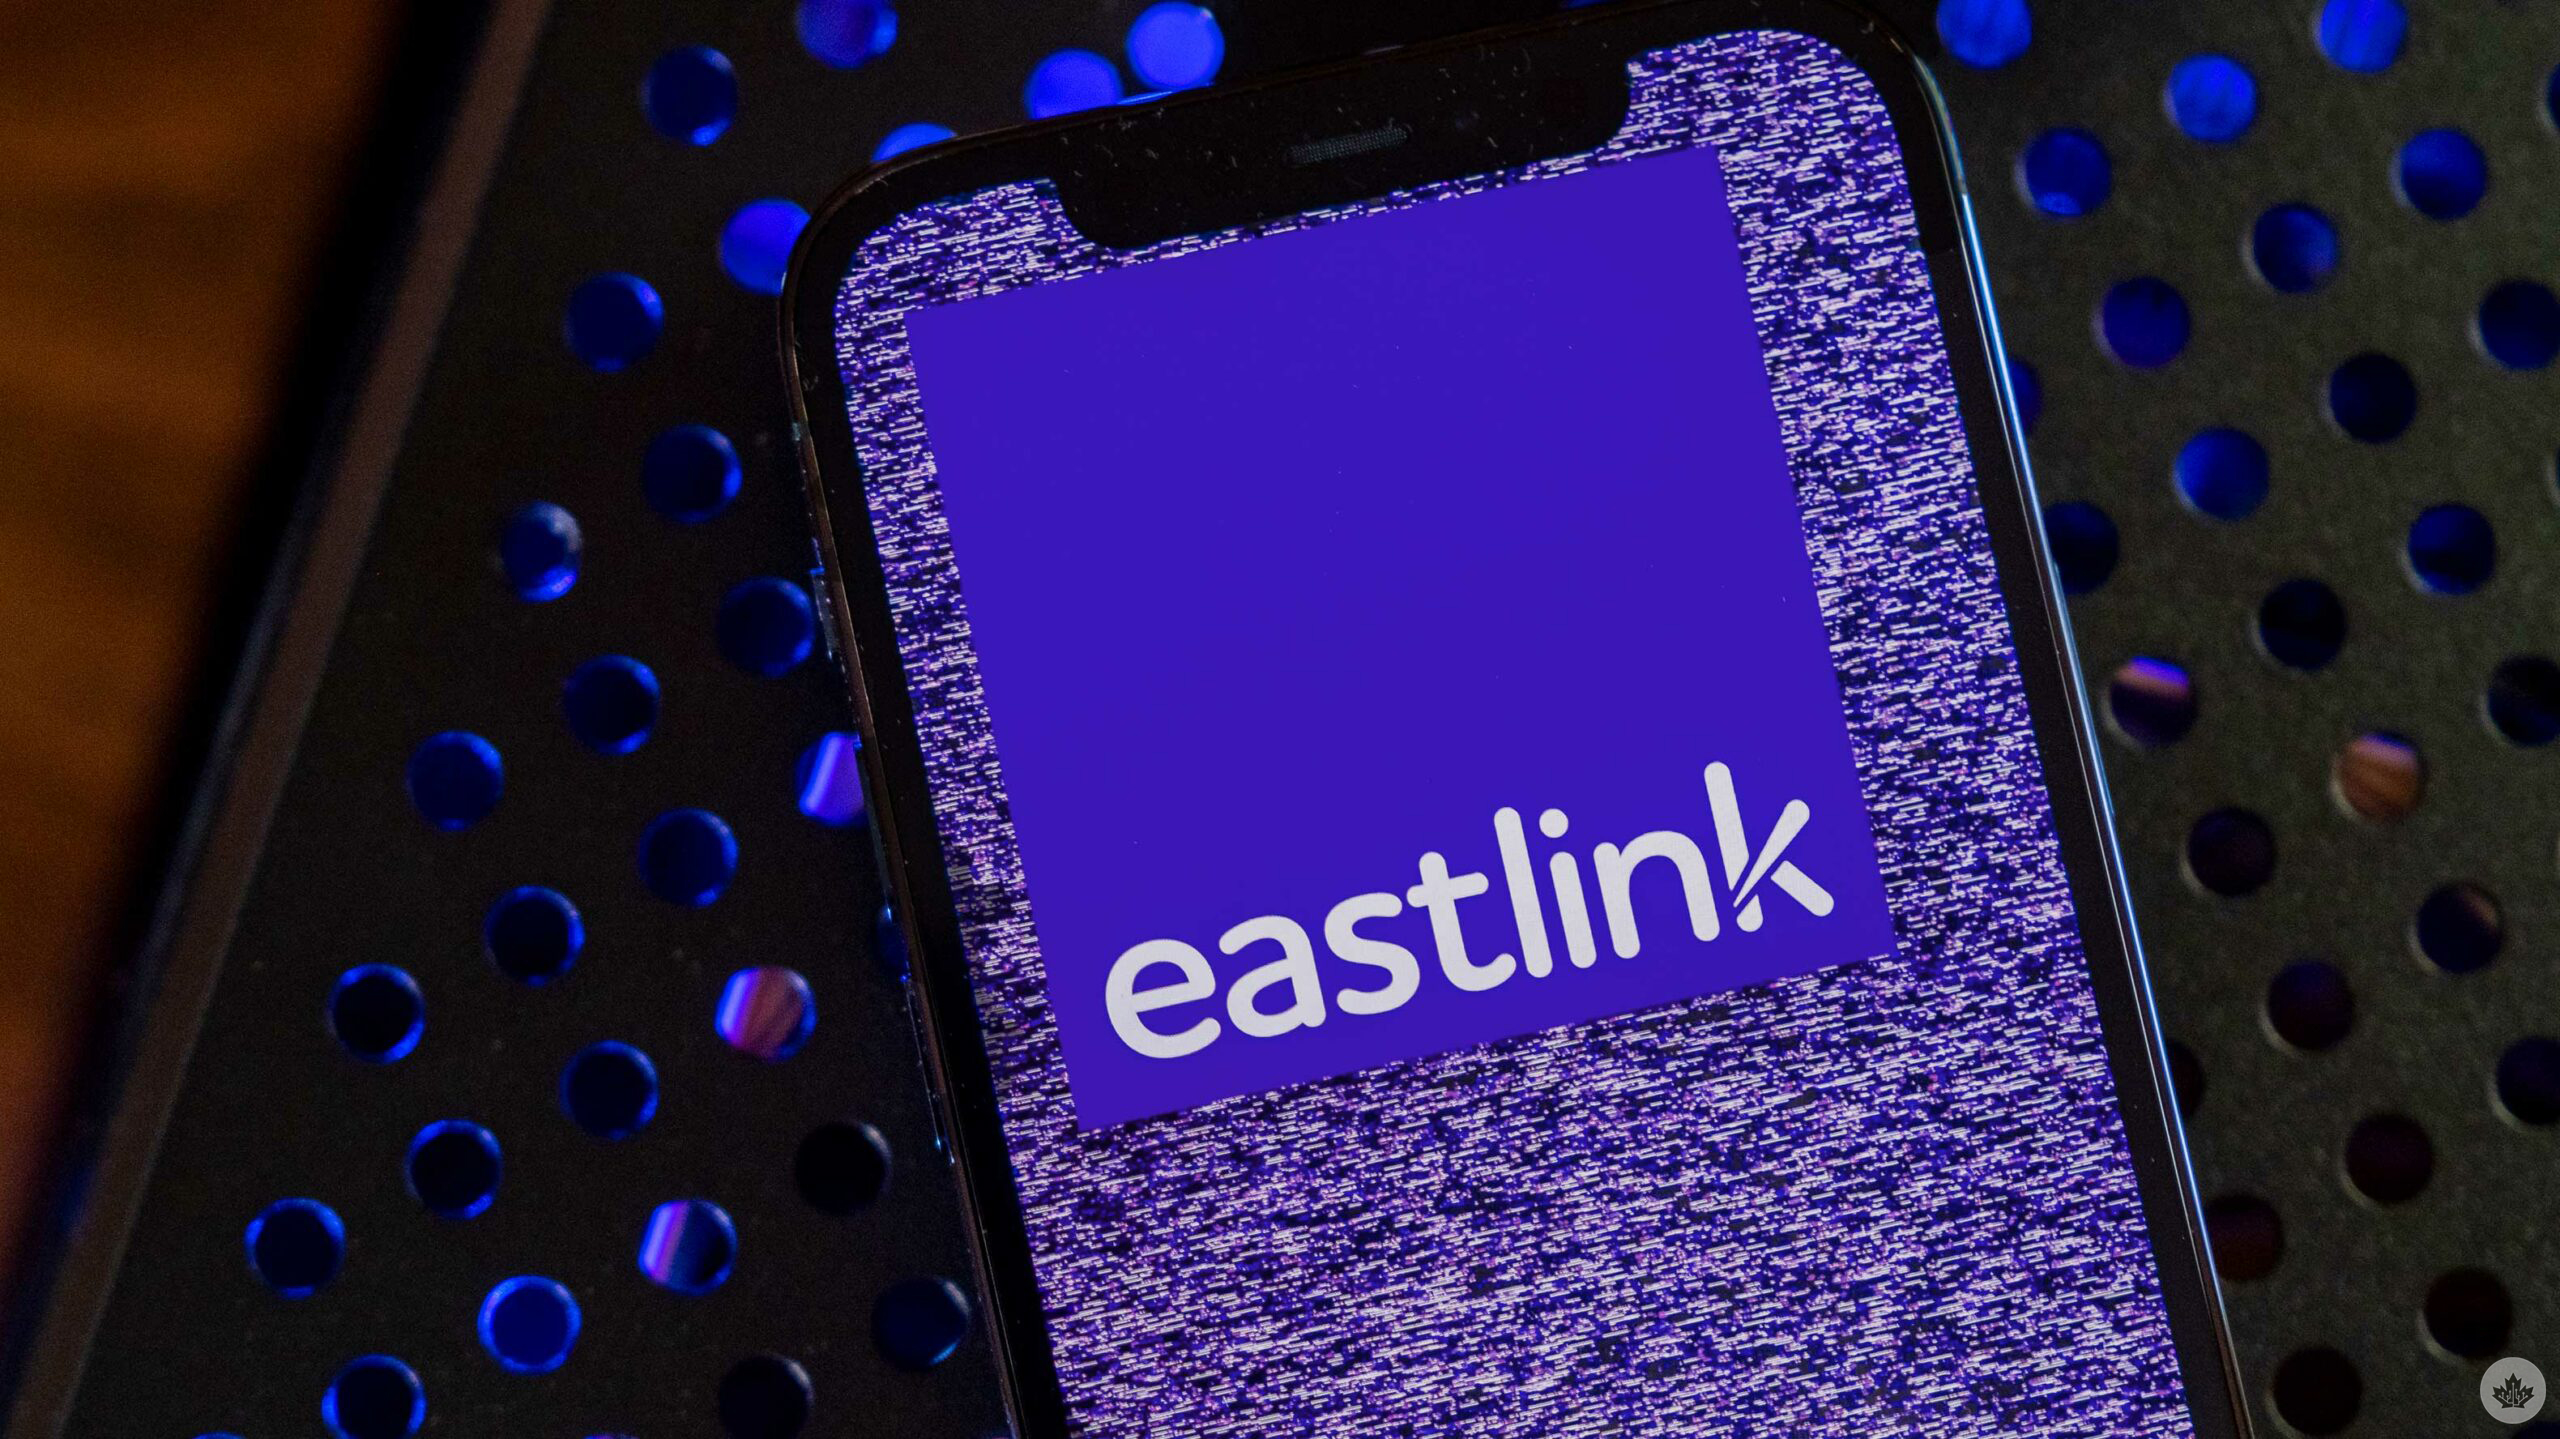 Eastlink expands in New Brunswick with Tracadie store. 26